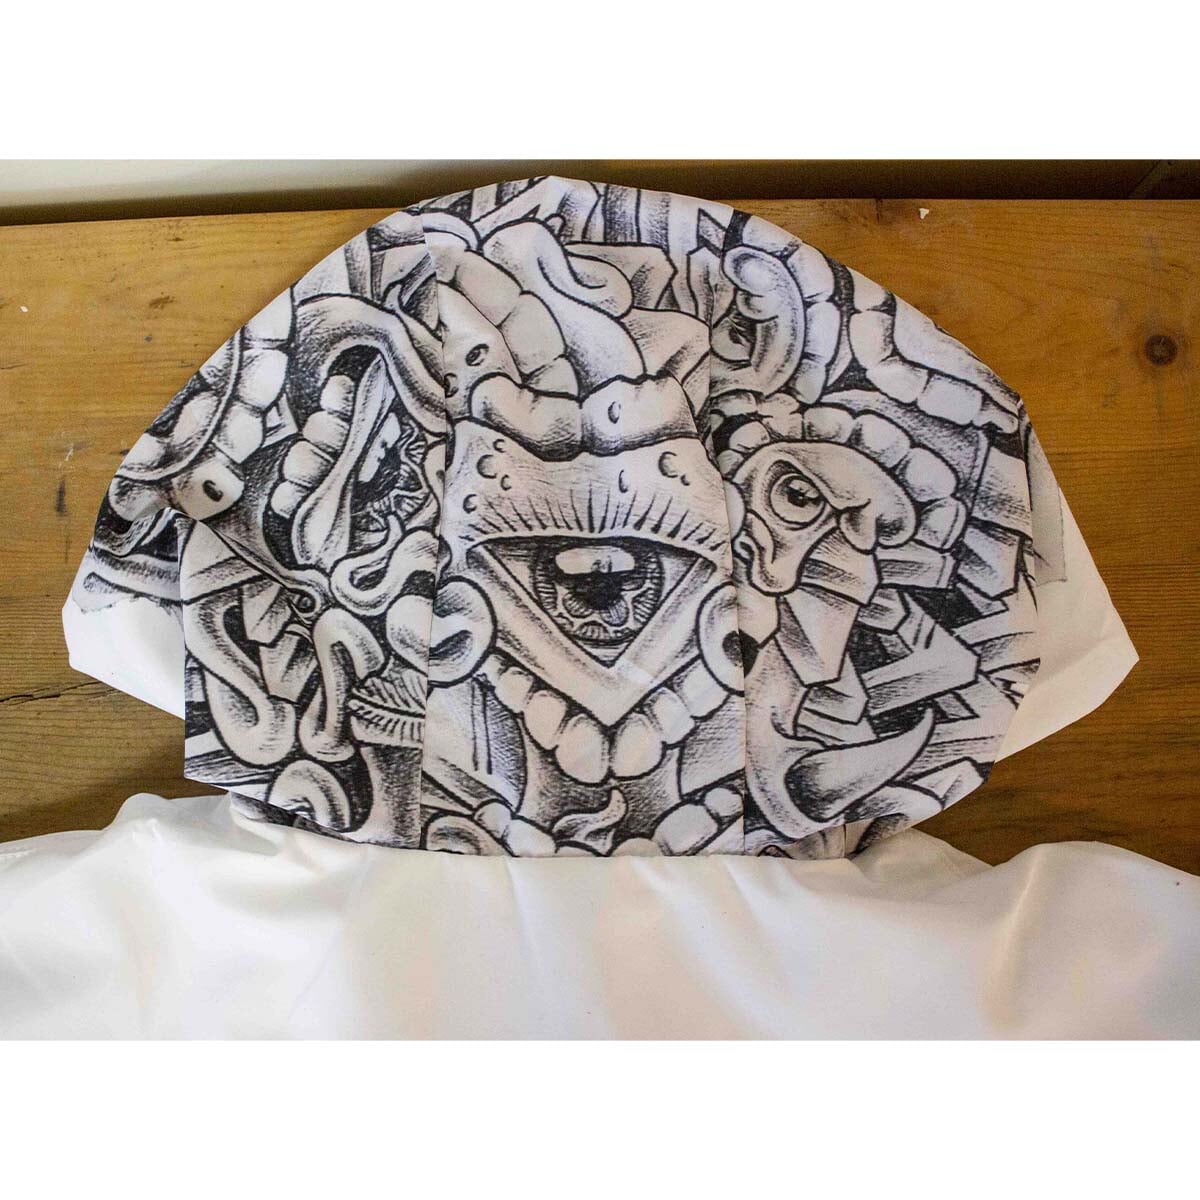 Incarcerated artist X Art for Redemption | Holiday Special Windbreaker prison art Print on Demand Art for Redemption 